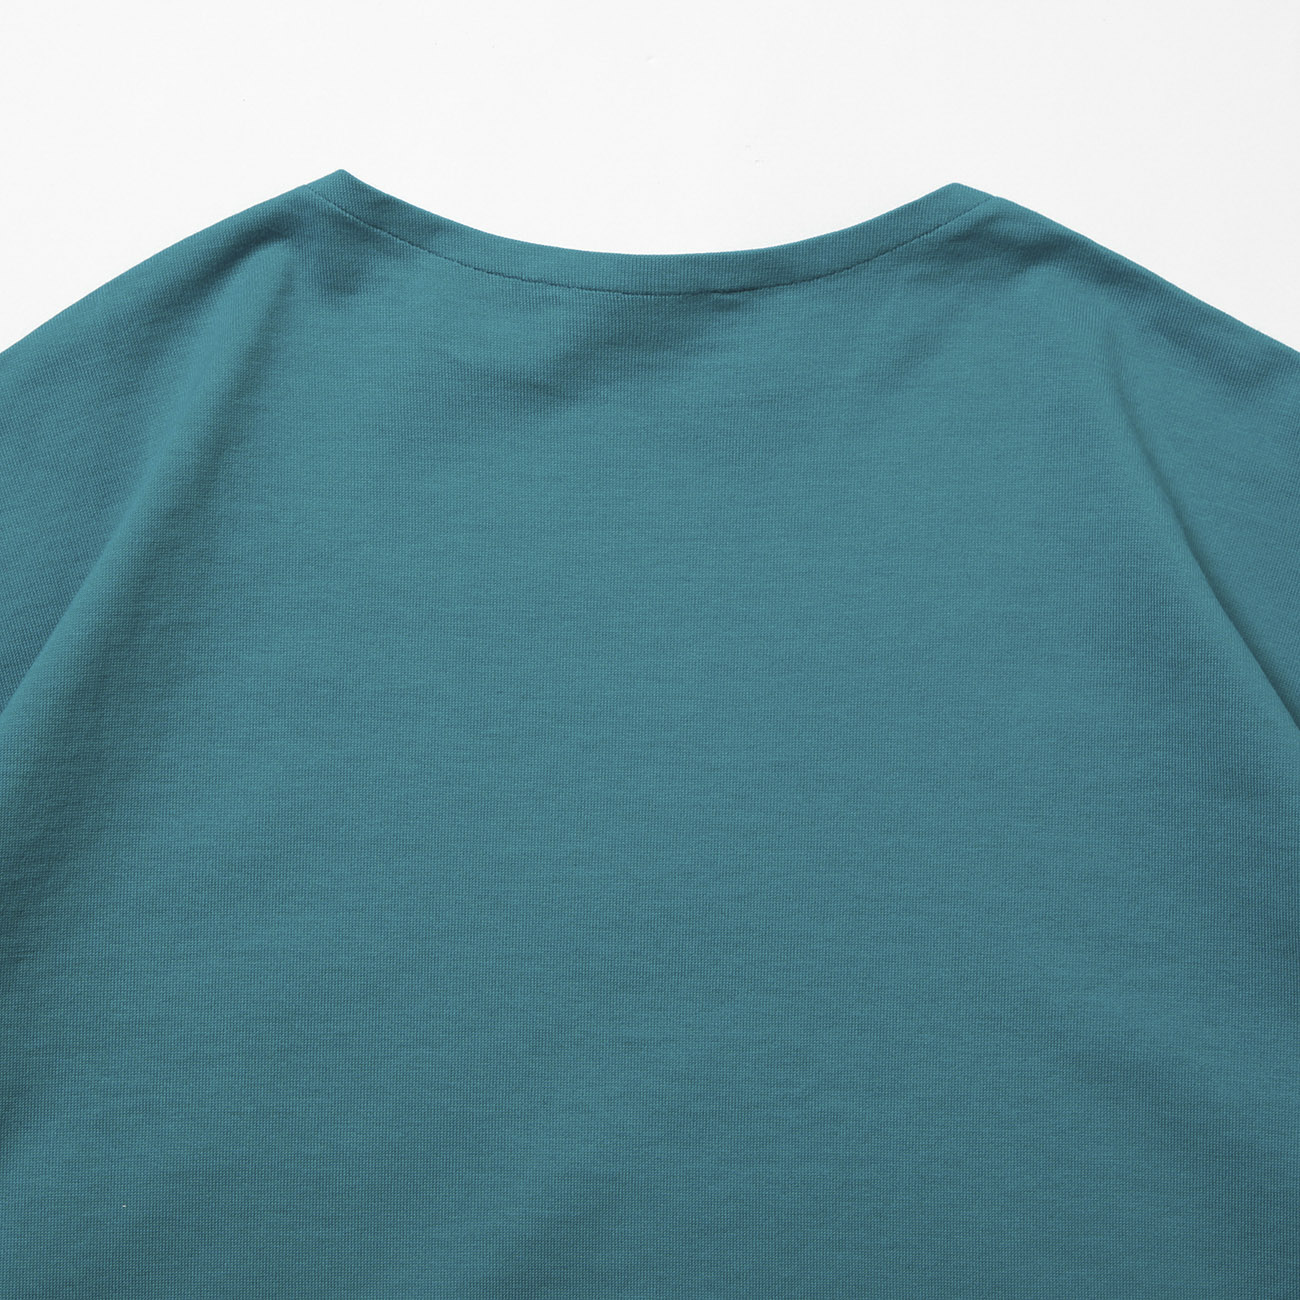 LUSTER PLAITING NARROW BOAT NECK TEE - Teal Green 背面